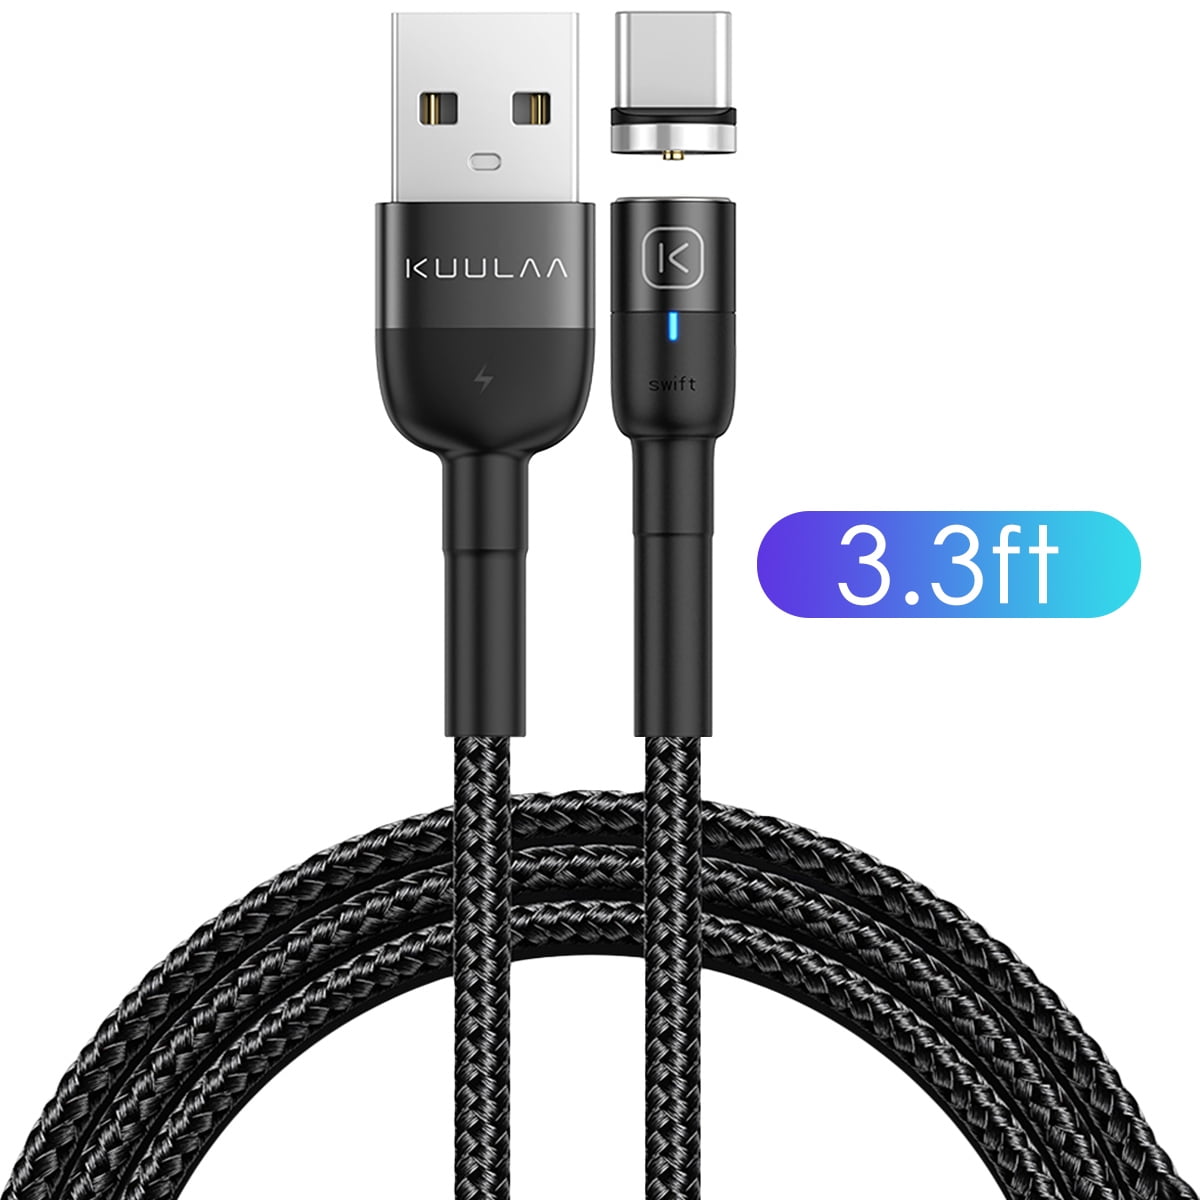 Nylon Braided QC 3.0 Quick Charger Cord 3 Feet Magnetic USB C Cable 3ft Magnetic Charging Cable for Samsung Galaxy S10 S9 S8 Plus Kuulaa 2 Pack Fast Charging Type c Cable 3 Foot with LED Light 